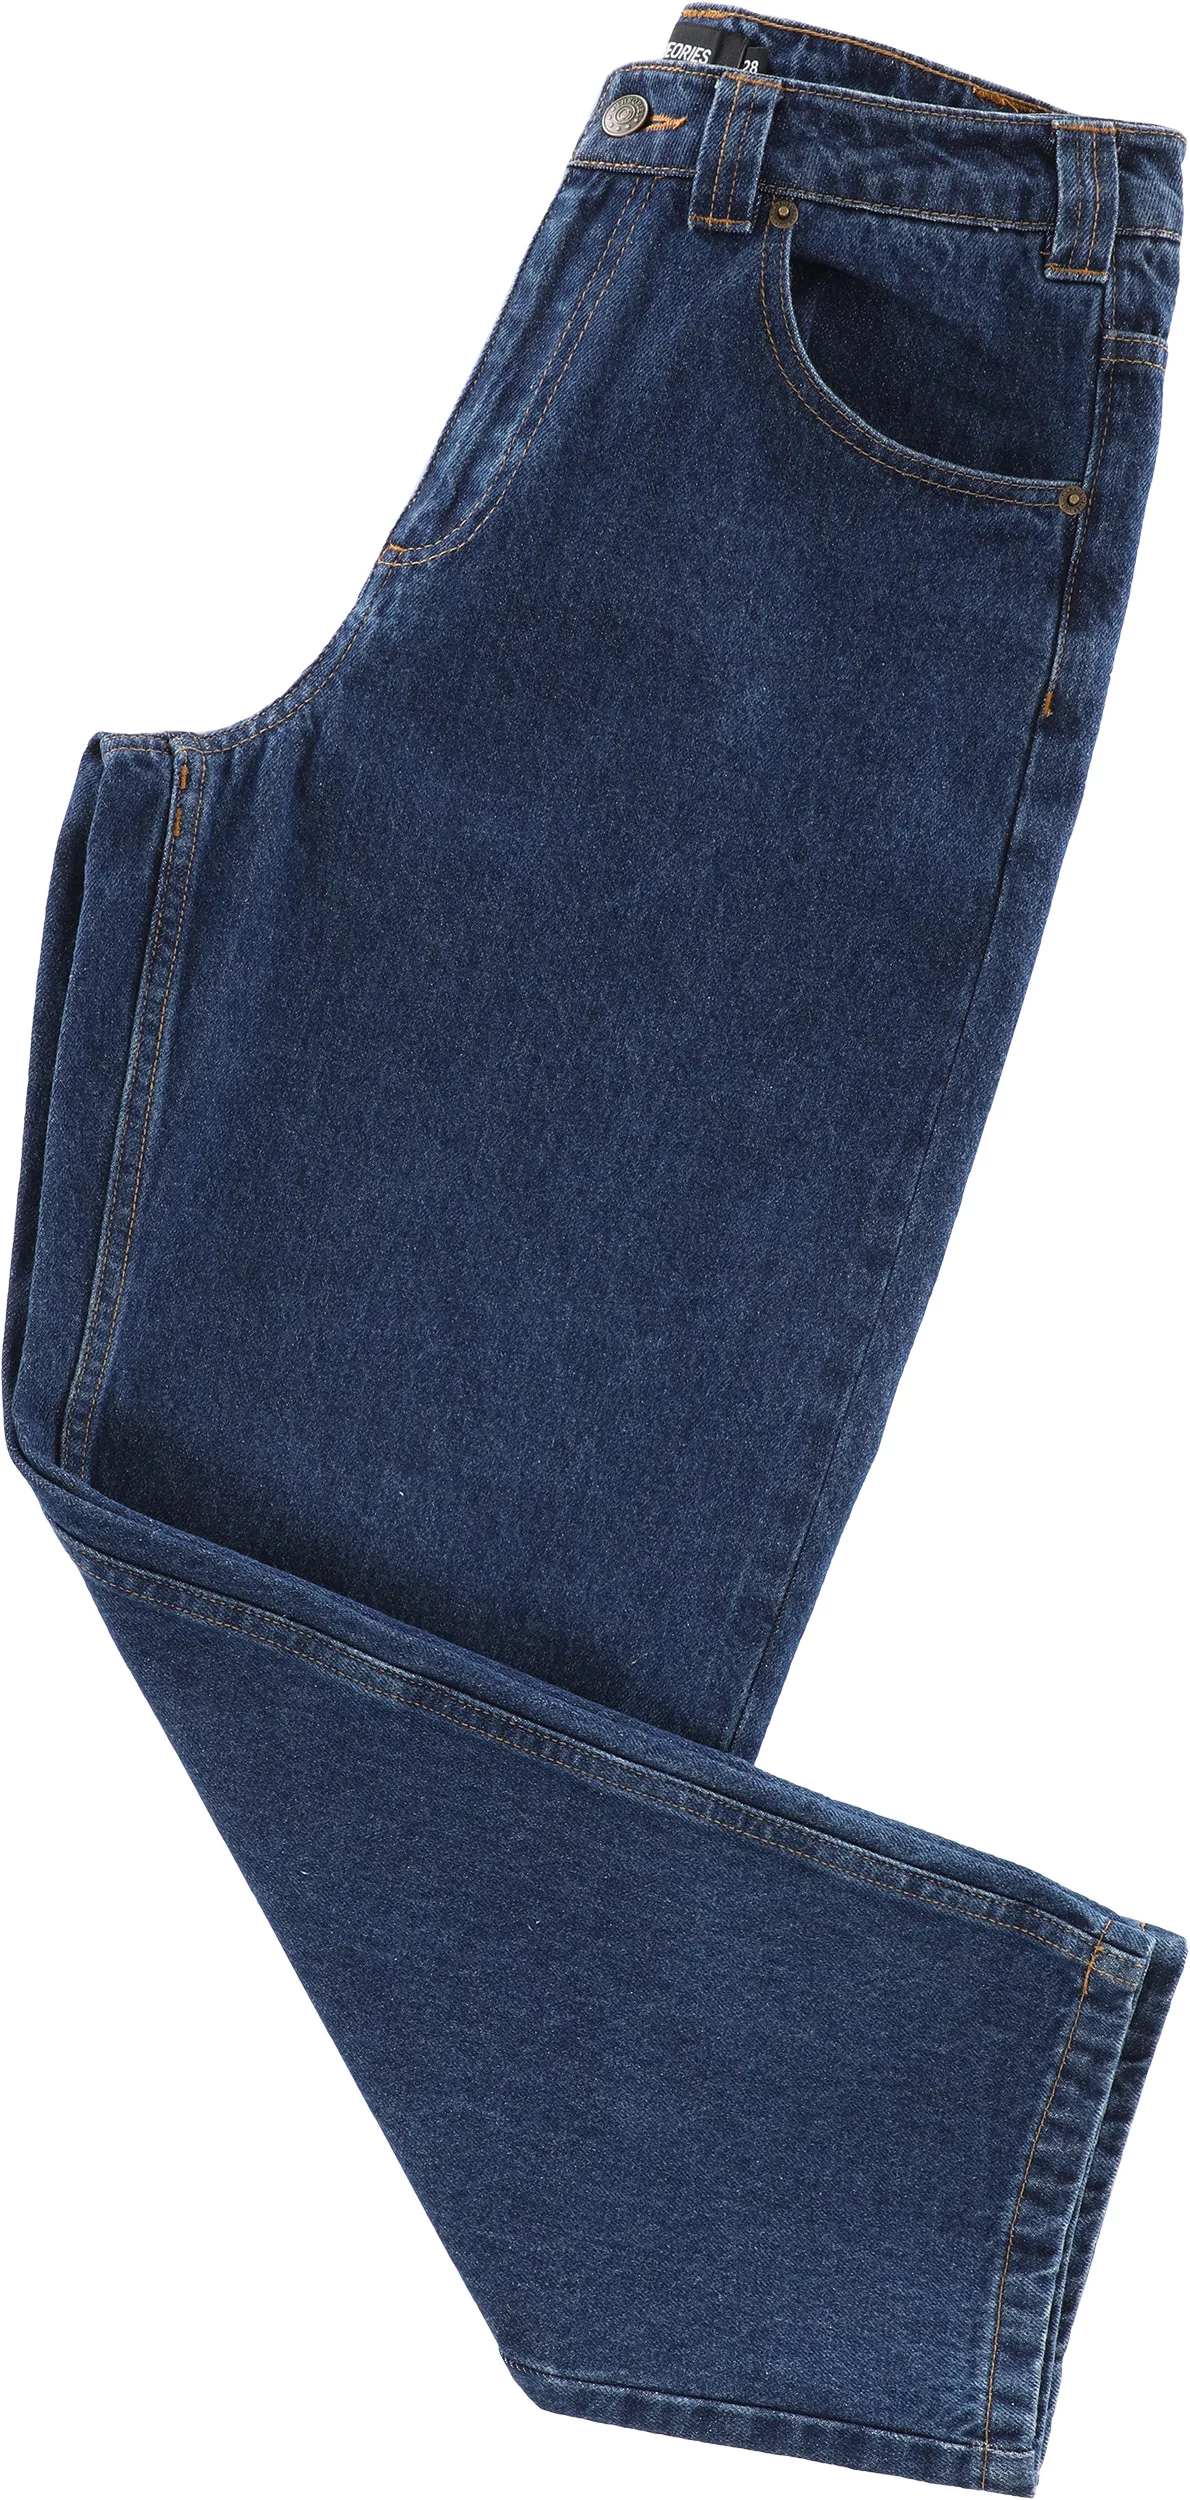 Theories Plaza Jeans - washed blue - Free Shipping | Tactics